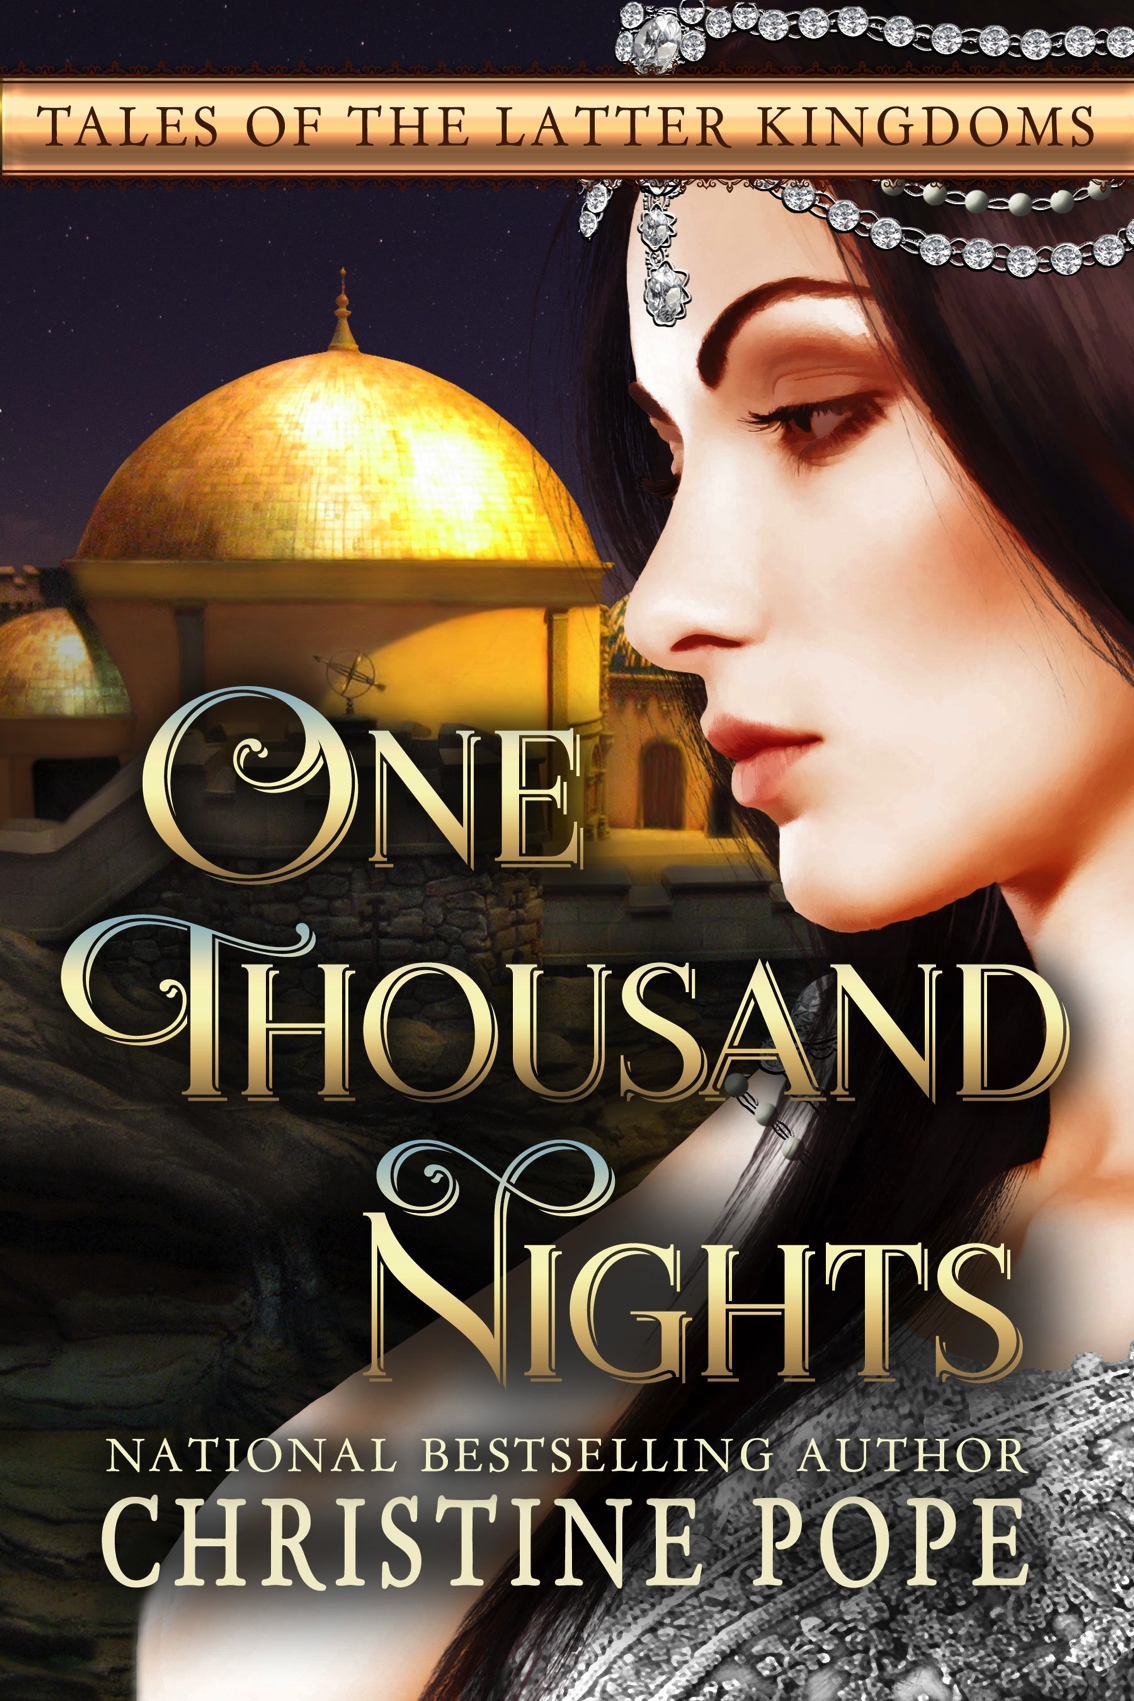 One Thousand Nights (2016) by Christine Pope